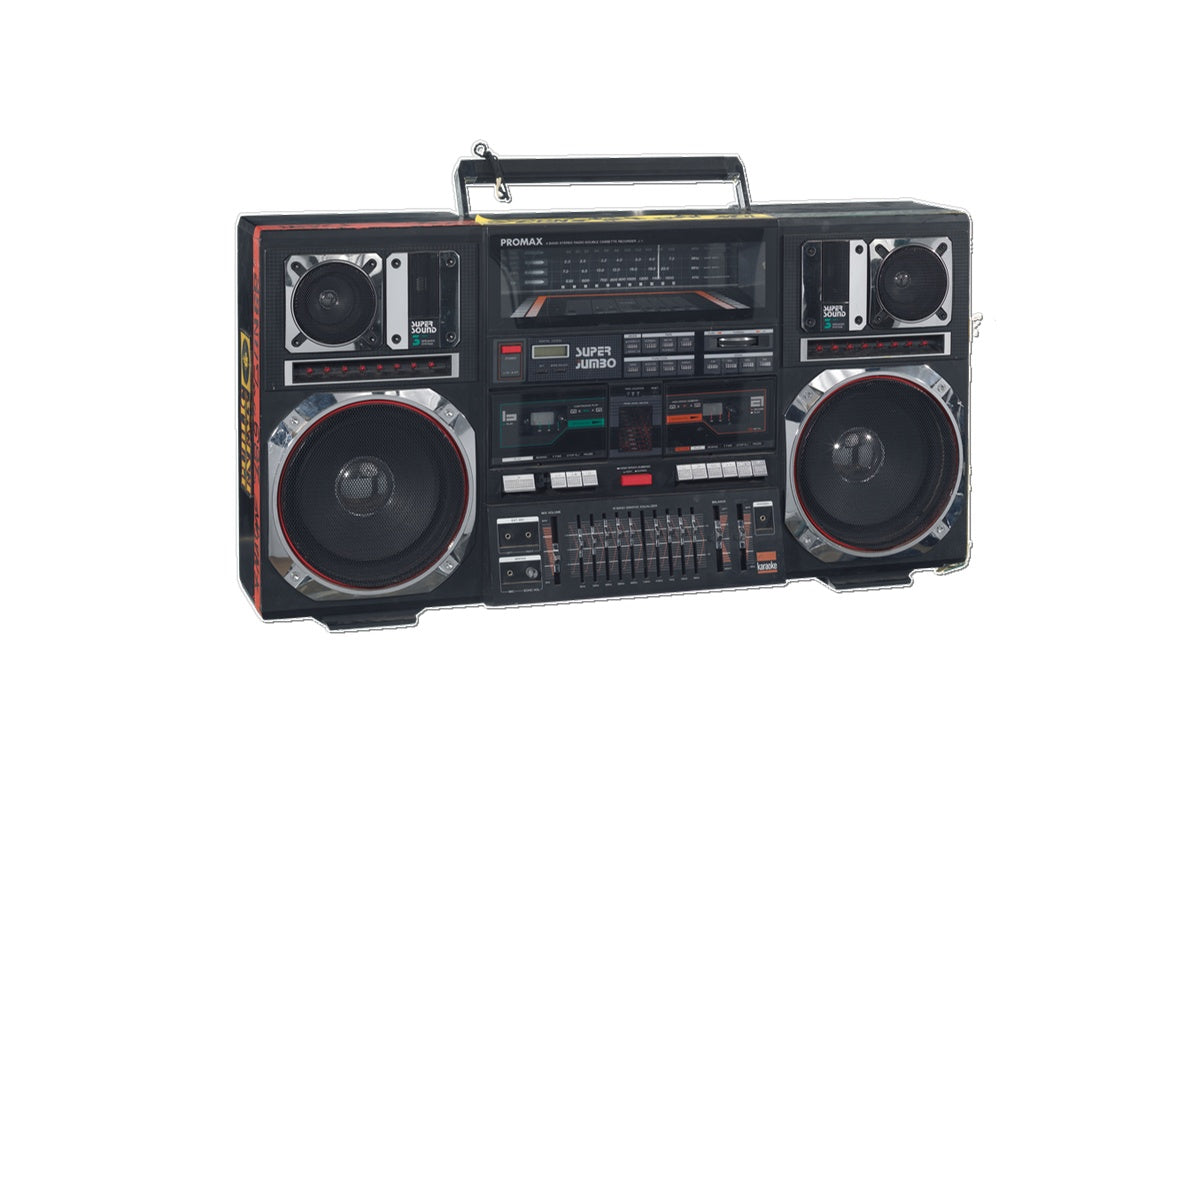 A Promax Super Jumbo Boombox from 'Do the Right Thing' ,1989 - Tattoo